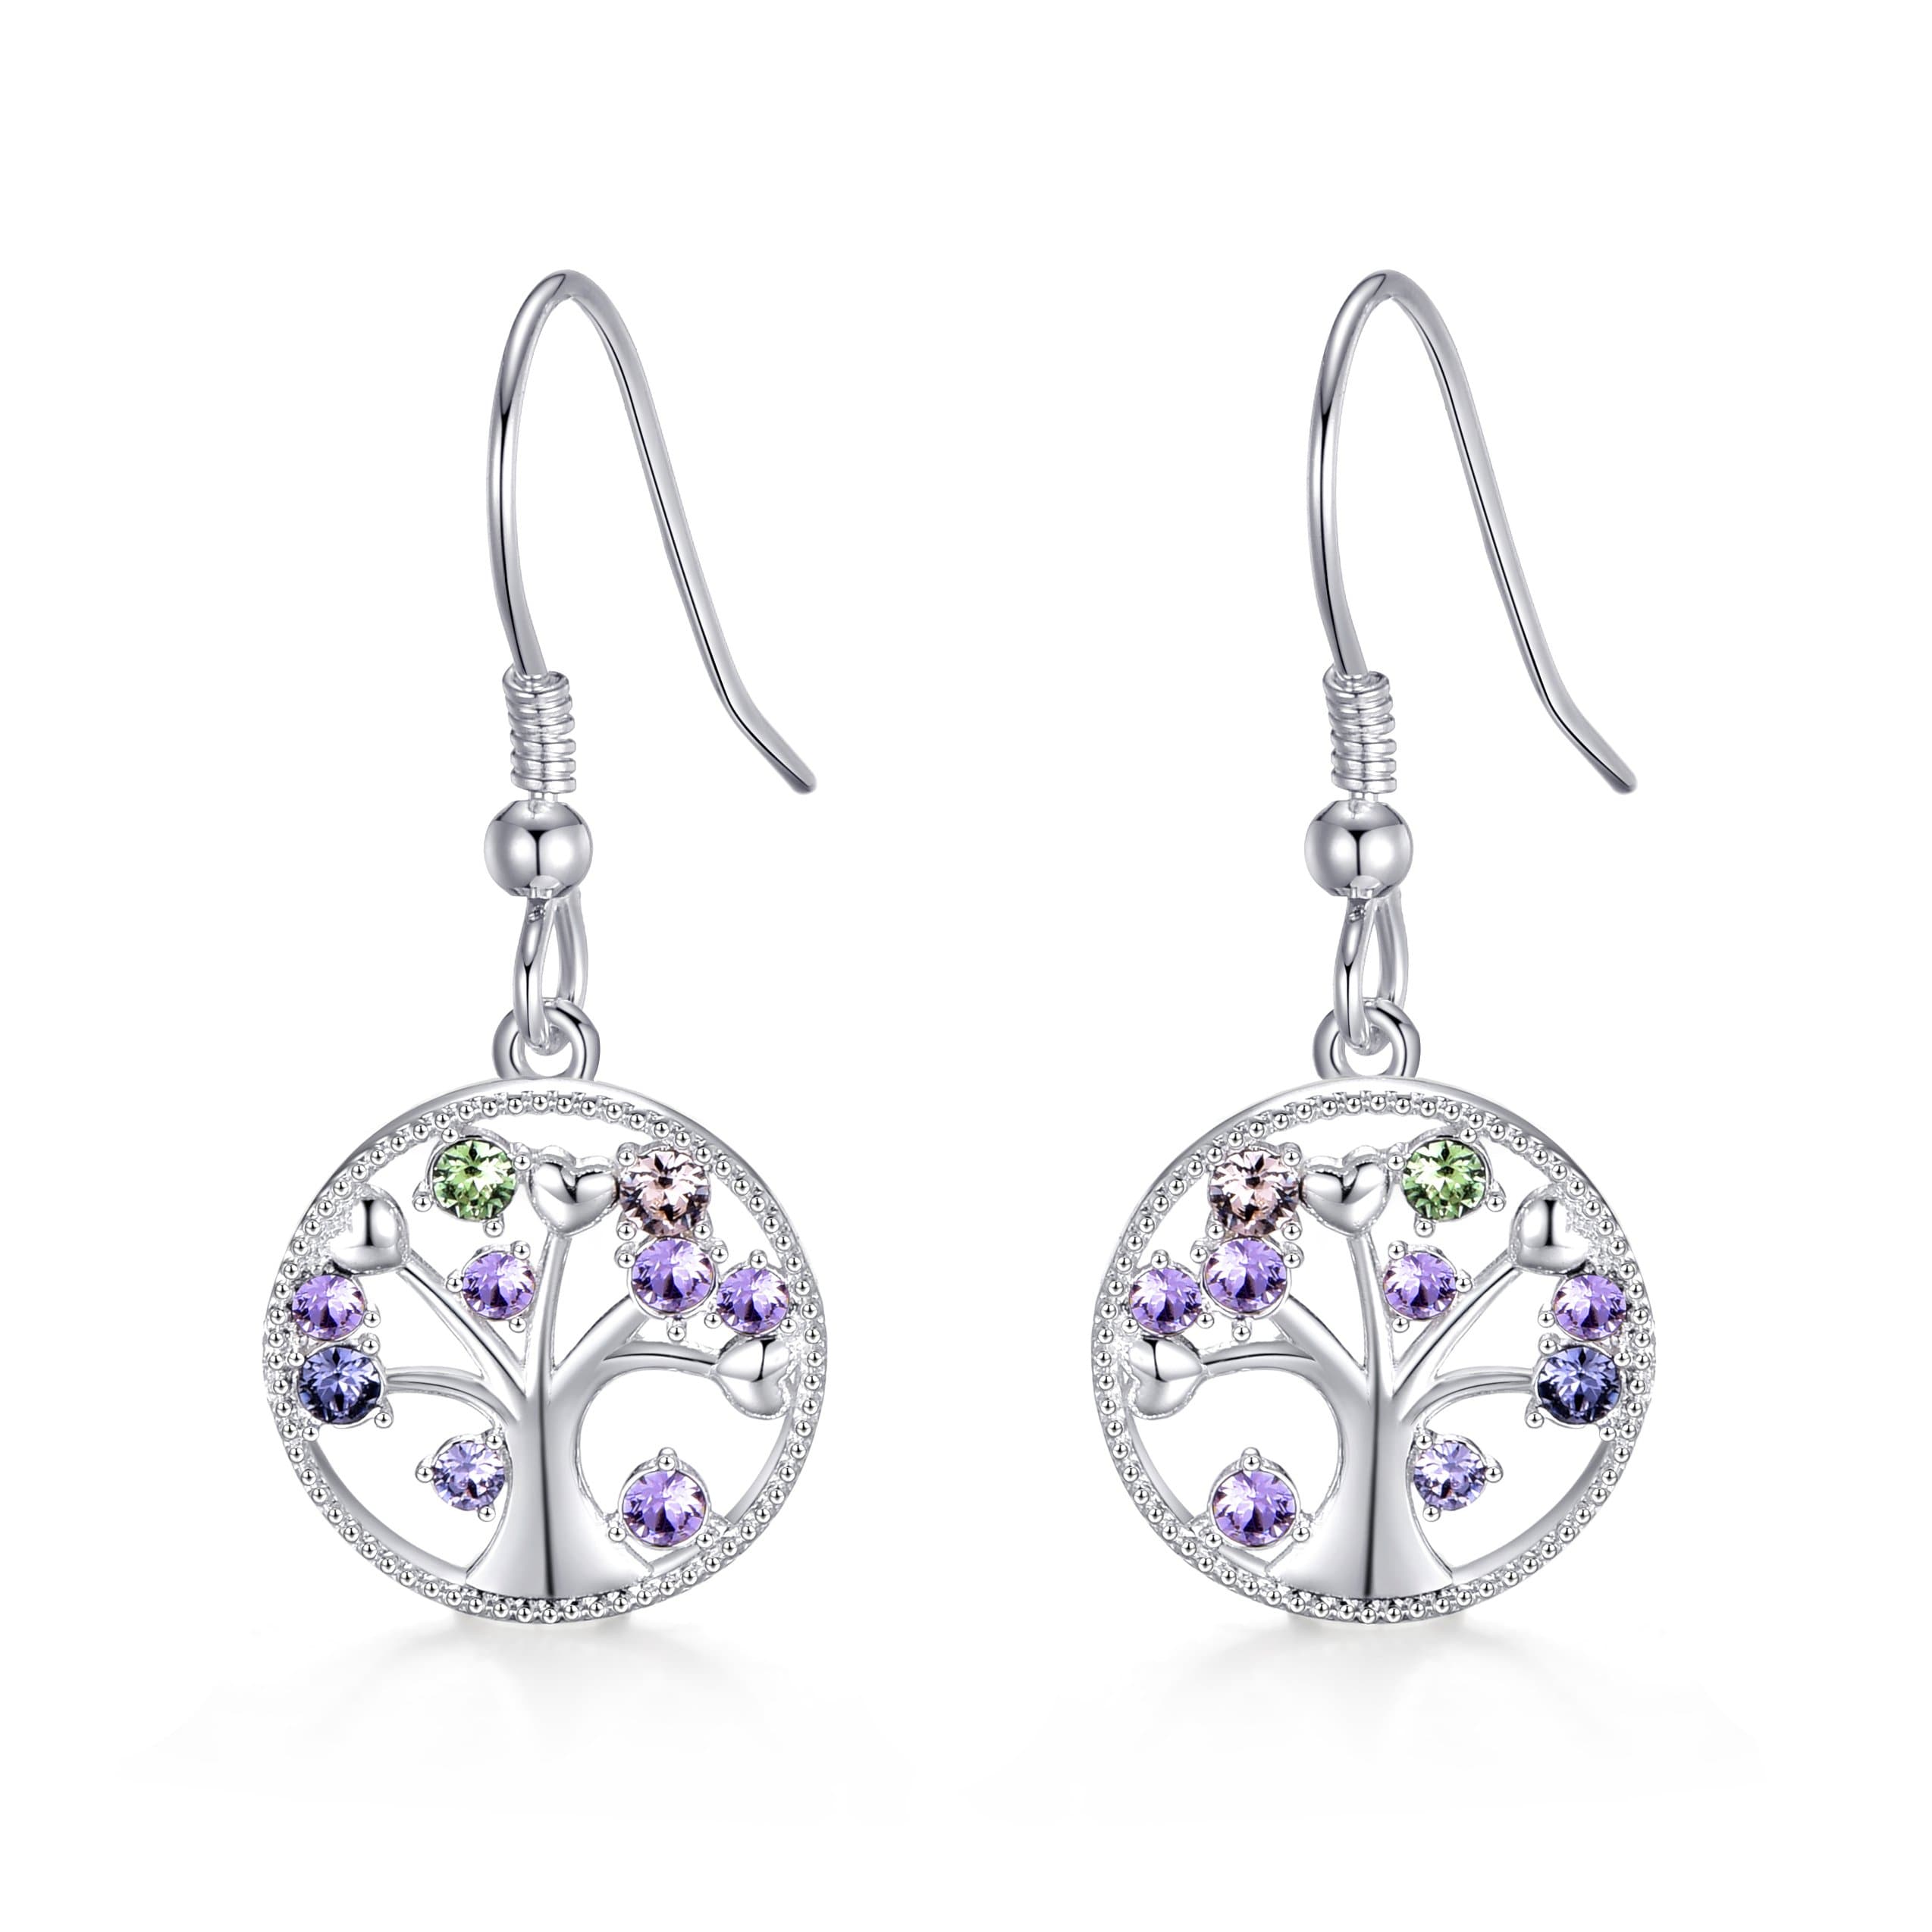 Silver Plated Chakra Tree of Life Drop Earrings Created with Crystals from Zircondia® by Philip Jones Jewellery